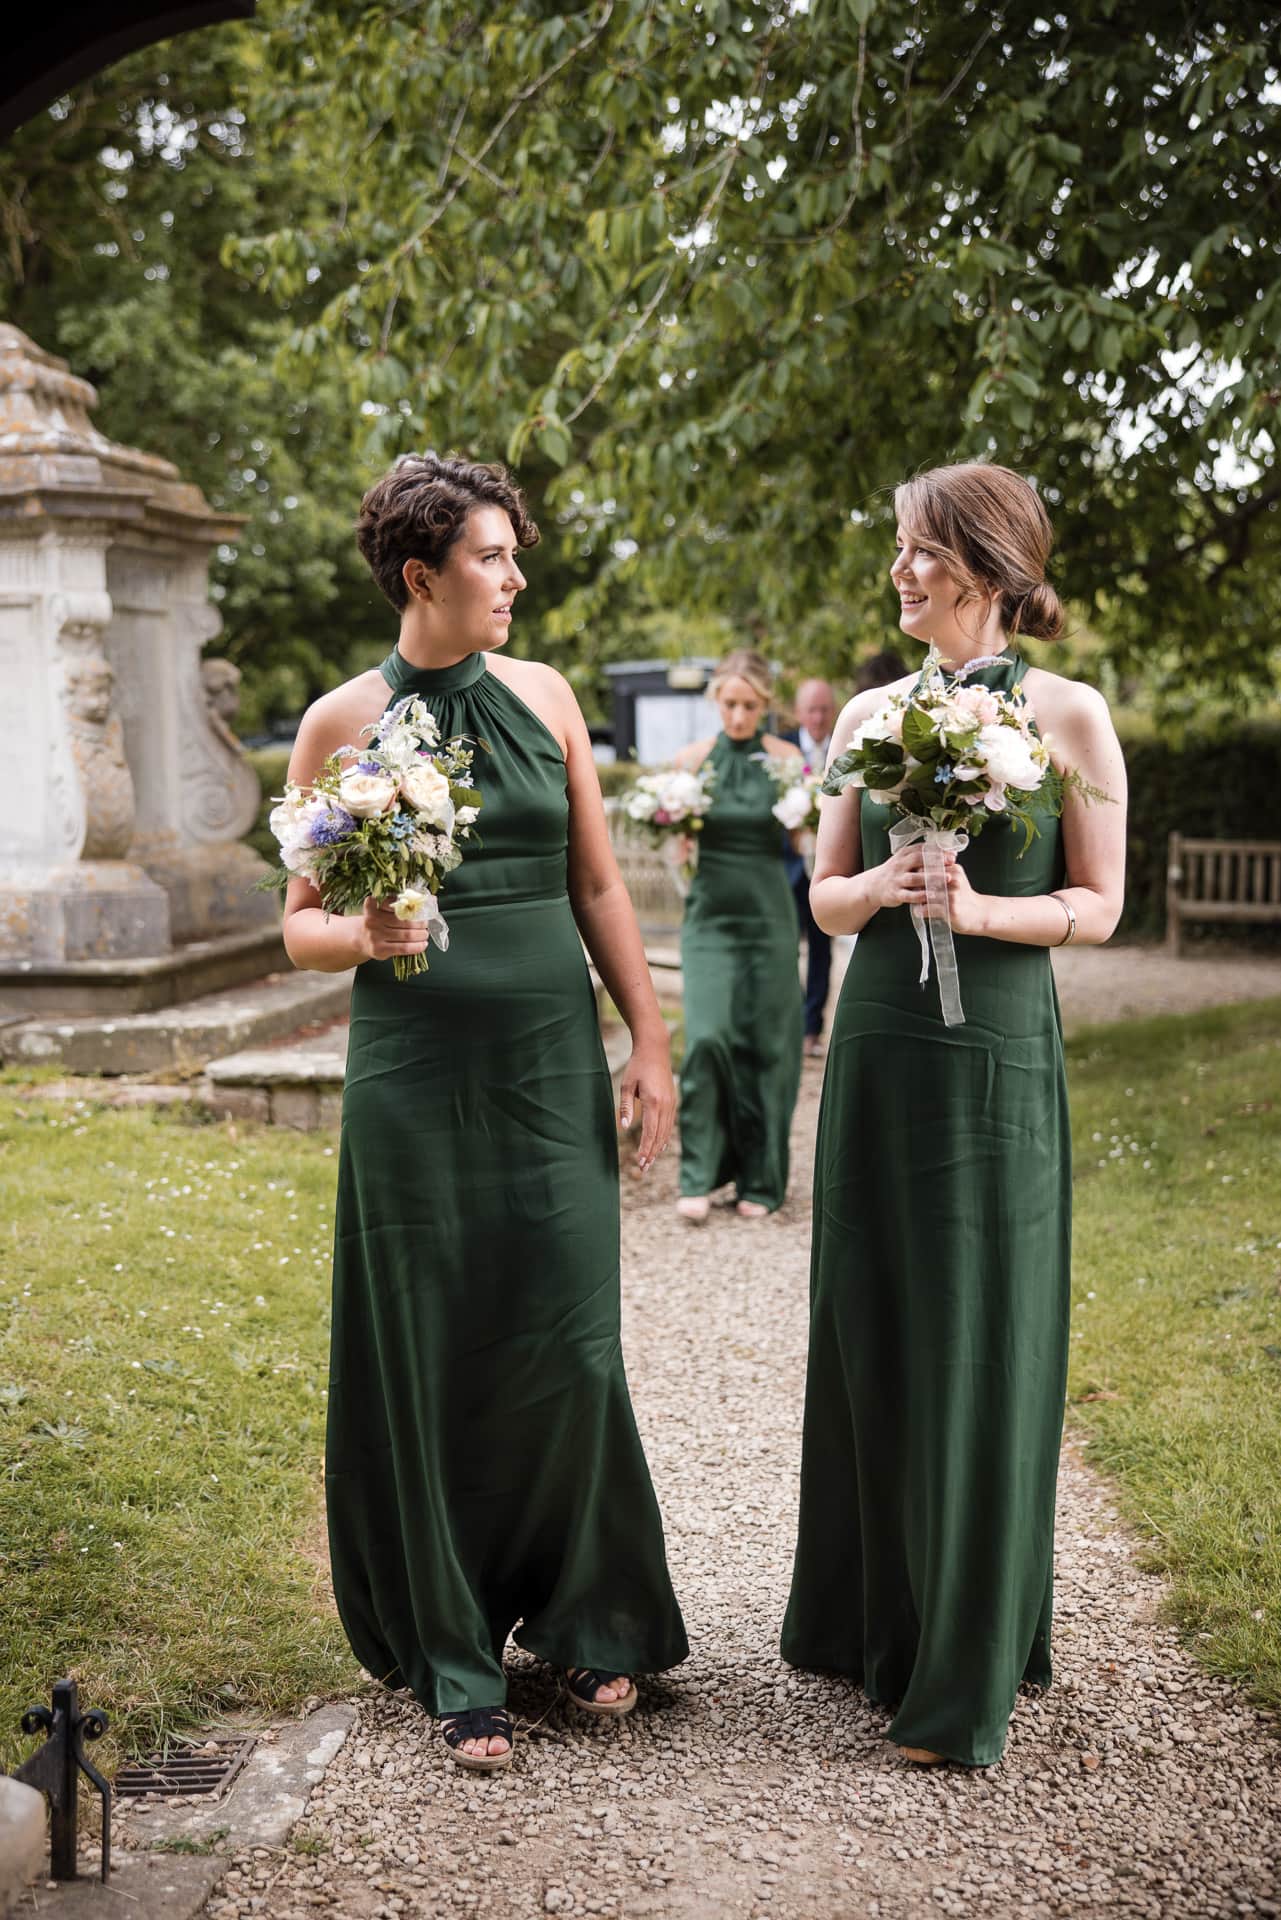 Two bridesmaids looking at each other